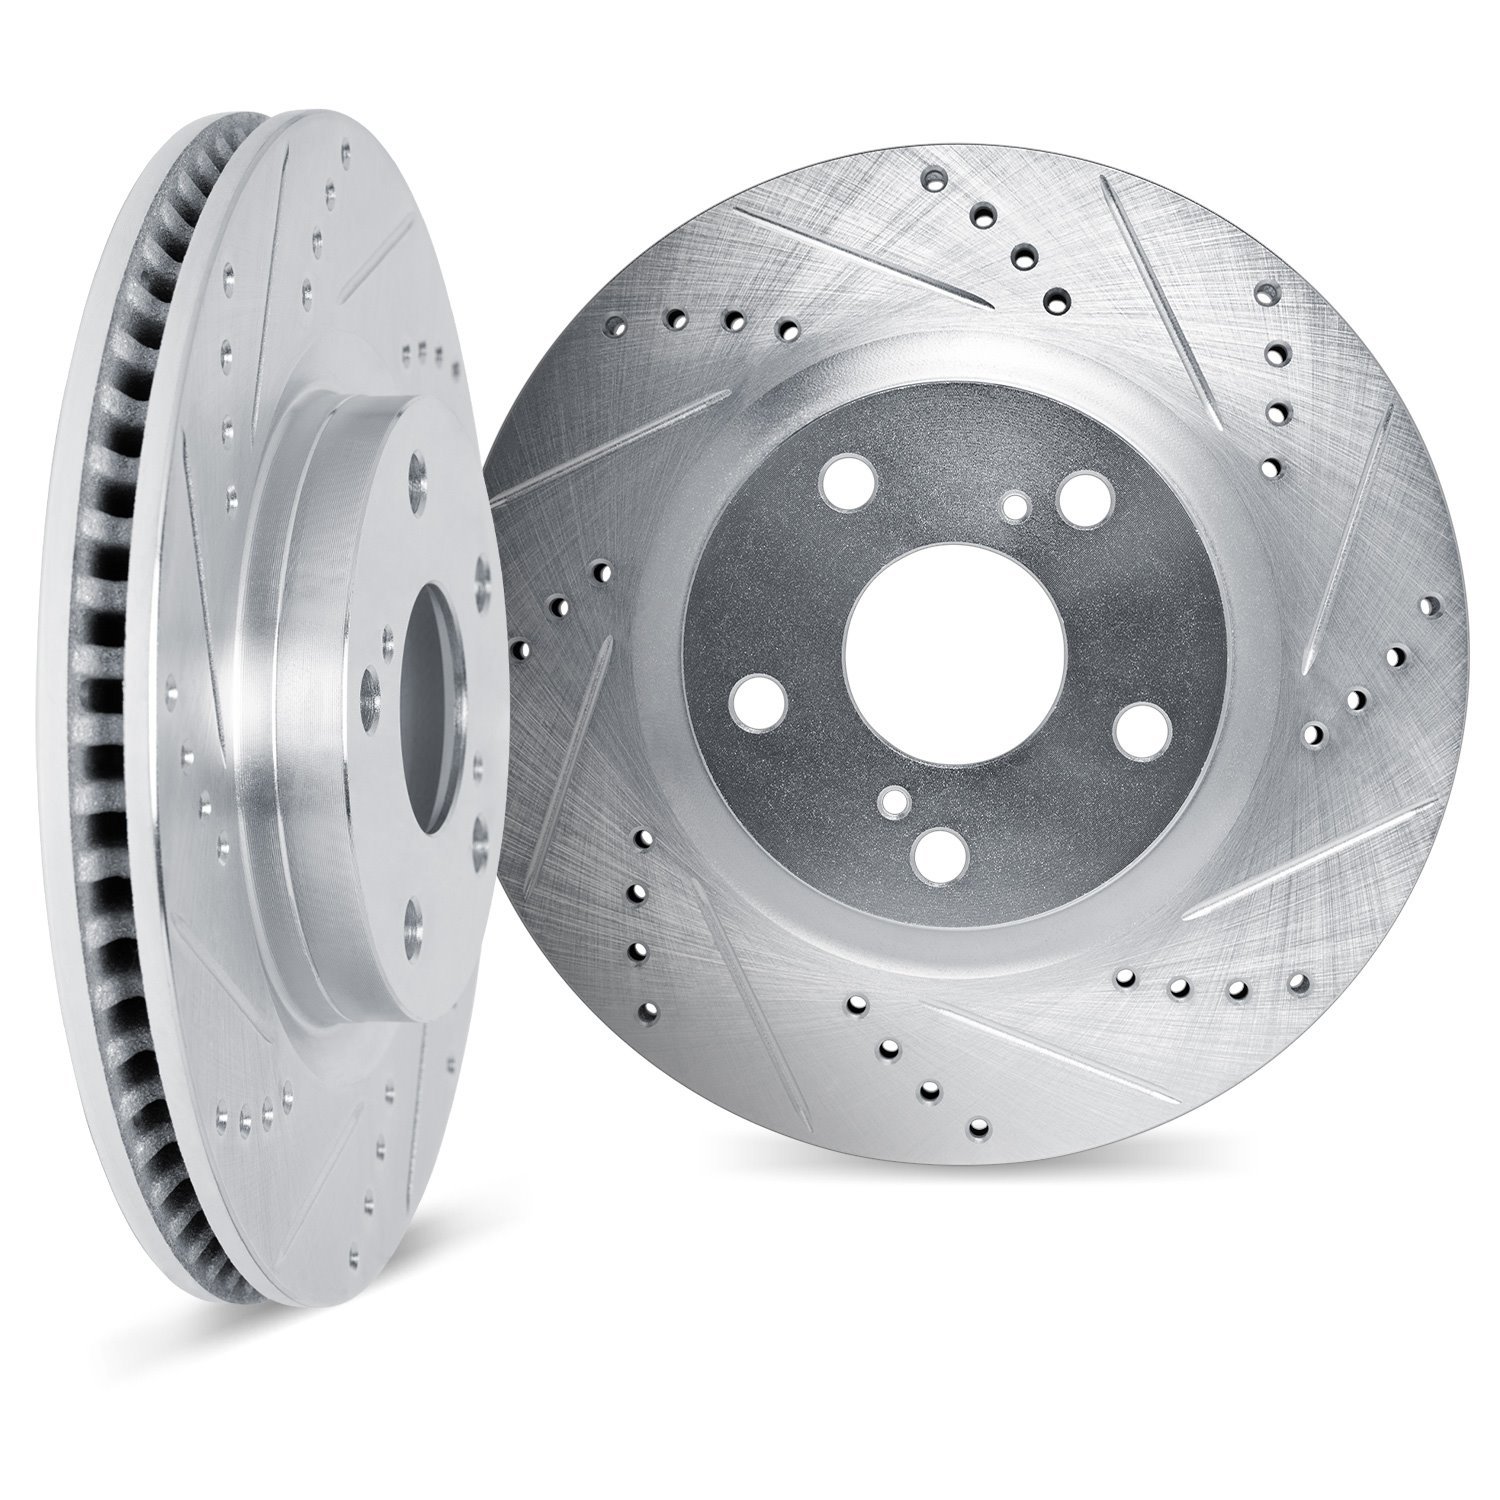 7002-02006 Drilled/Slotted Brake Rotors [Silver], Fits Select Multiple Makes/Models, Position: Rear